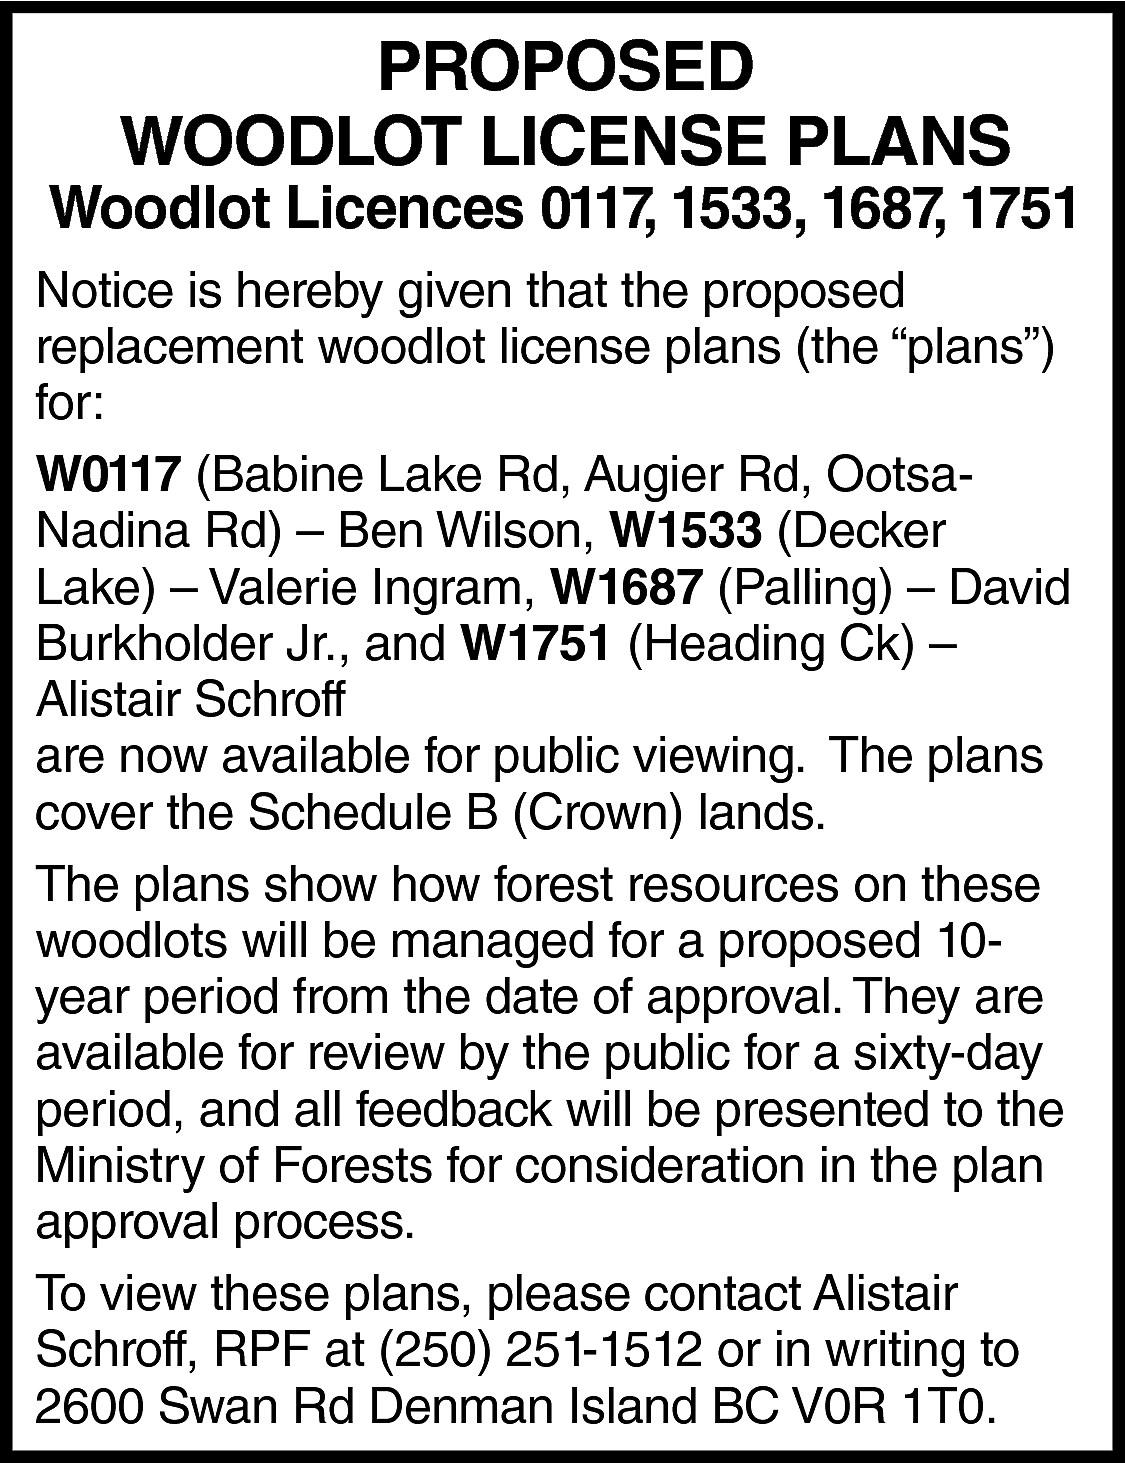 PROPOSED <br>WOODLOT LICENSE PLANS <br>  PROPOSED  WOODLOT LICENSE PLANS    Woodlot Licences 0117, 1533, 1687, 1751  Notice is hereby given that the proposed  replacement woodlot license plans (the “plans”)  for:  W0117 (Babine Lake Rd, Augier Rd, OotsaNadina Rd) – Ben Wilson, W1533 (Decker  Lake) – Valerie Ingram, W1687 (Palling) – David  Burkholder Jr., and W1751 (Heading Ck) –  Alistair Schroff  are now available for public viewing. The plans  cover the Schedule B (Crown) lands.  The plans show how forest resources on these  woodlots will be managed for a proposed 10year period from the date of approval. They are  available for review by the public for a sixty-day  period, and all feedback will be presented to the  Ministry of Forests for consideration in the plan  approval process.  To view these plans, please contact Alistair  Schroff, RPF at (250) 251-1512 or in writing to  2600 Swan Rd Denman Island BC V0R 1T0.    